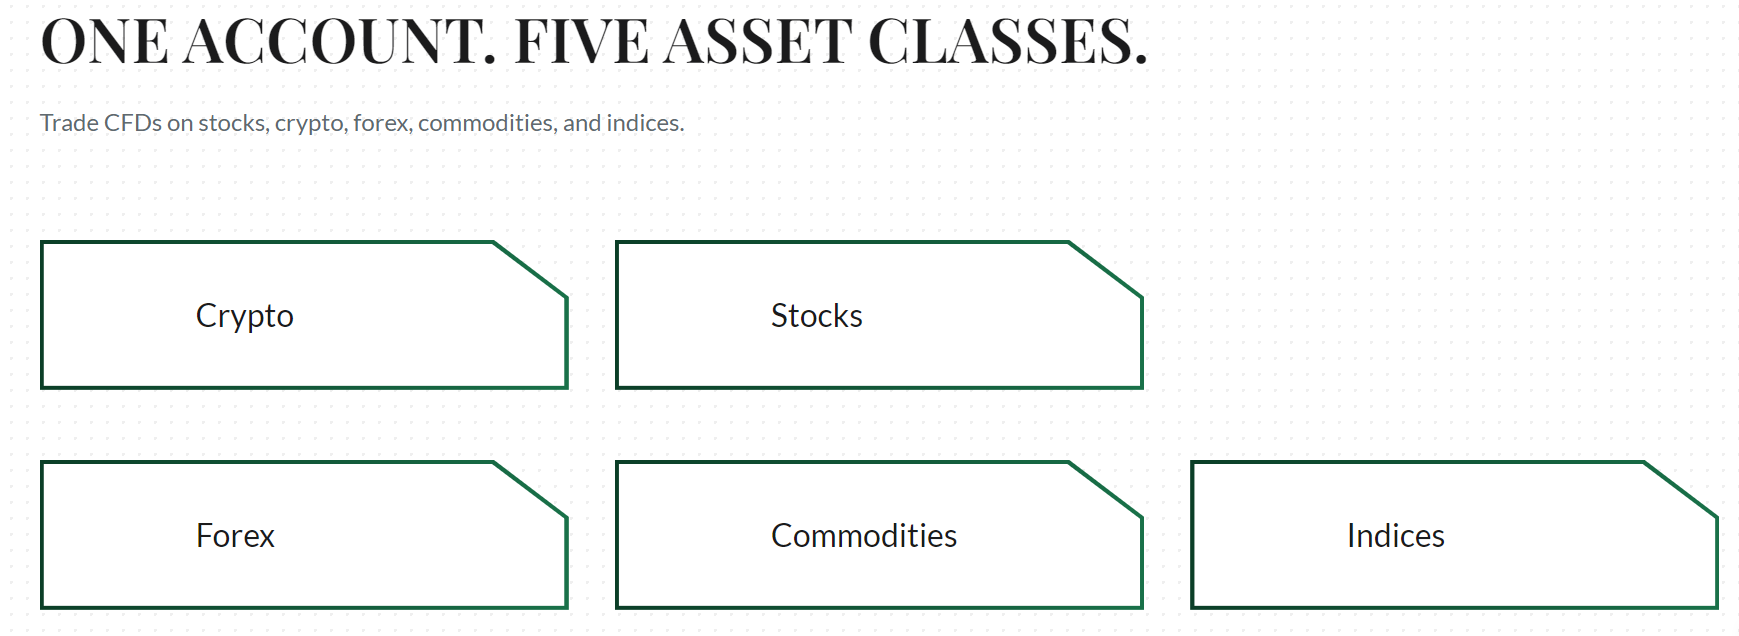 Stanford Financial Asset Classes